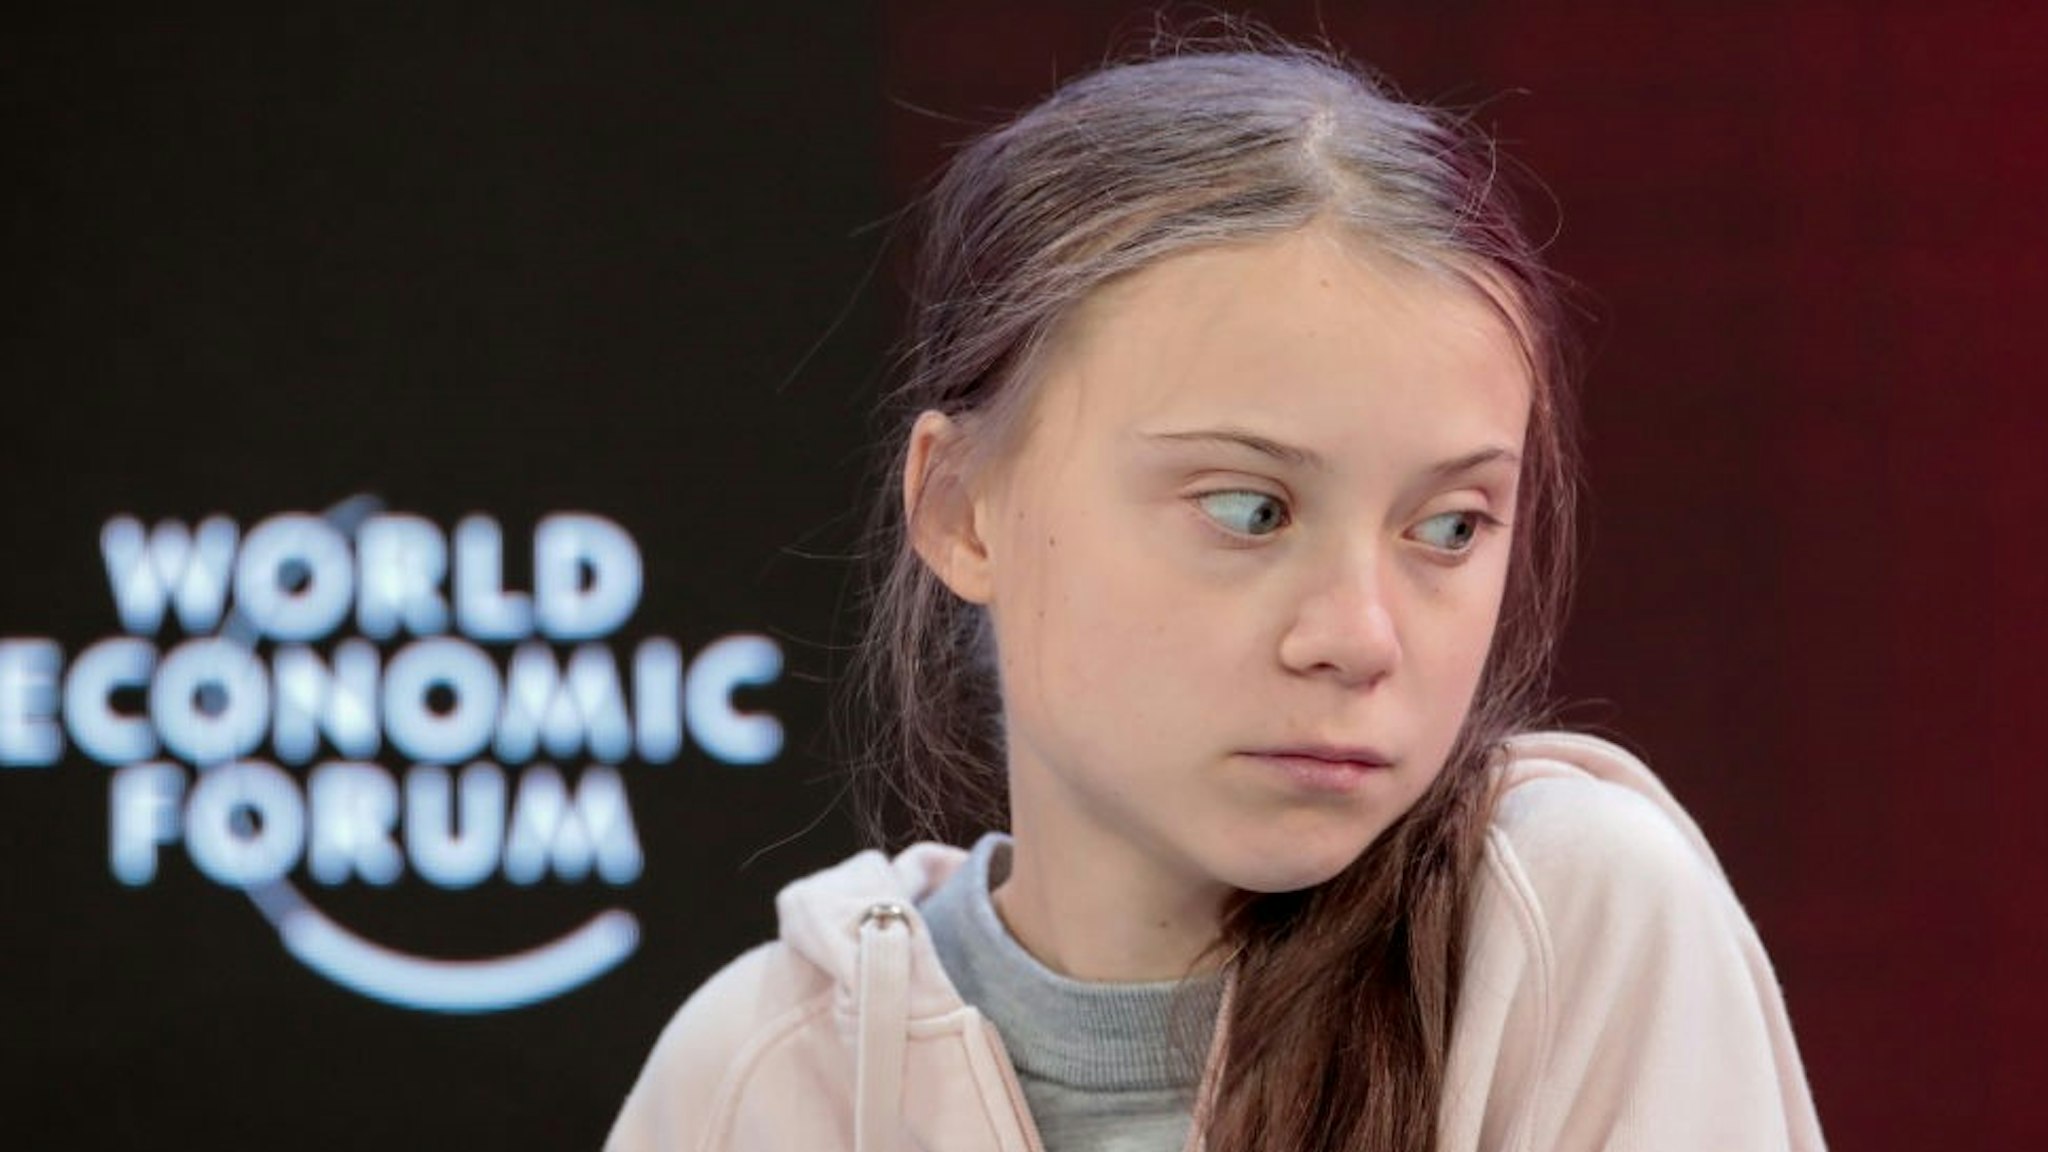 Greta Thunberg, climate activist, reacts during a panel session on the opening day of the World Economic Forum (WEF) in Davos, Switzerland, on Tuesday, Jan. 21, 2020. World leaders, influential executives, bankers and policy makers attend the 50th annual meeting of the World Economic Forum in Davos from Jan. 21 - 24. Photographer: